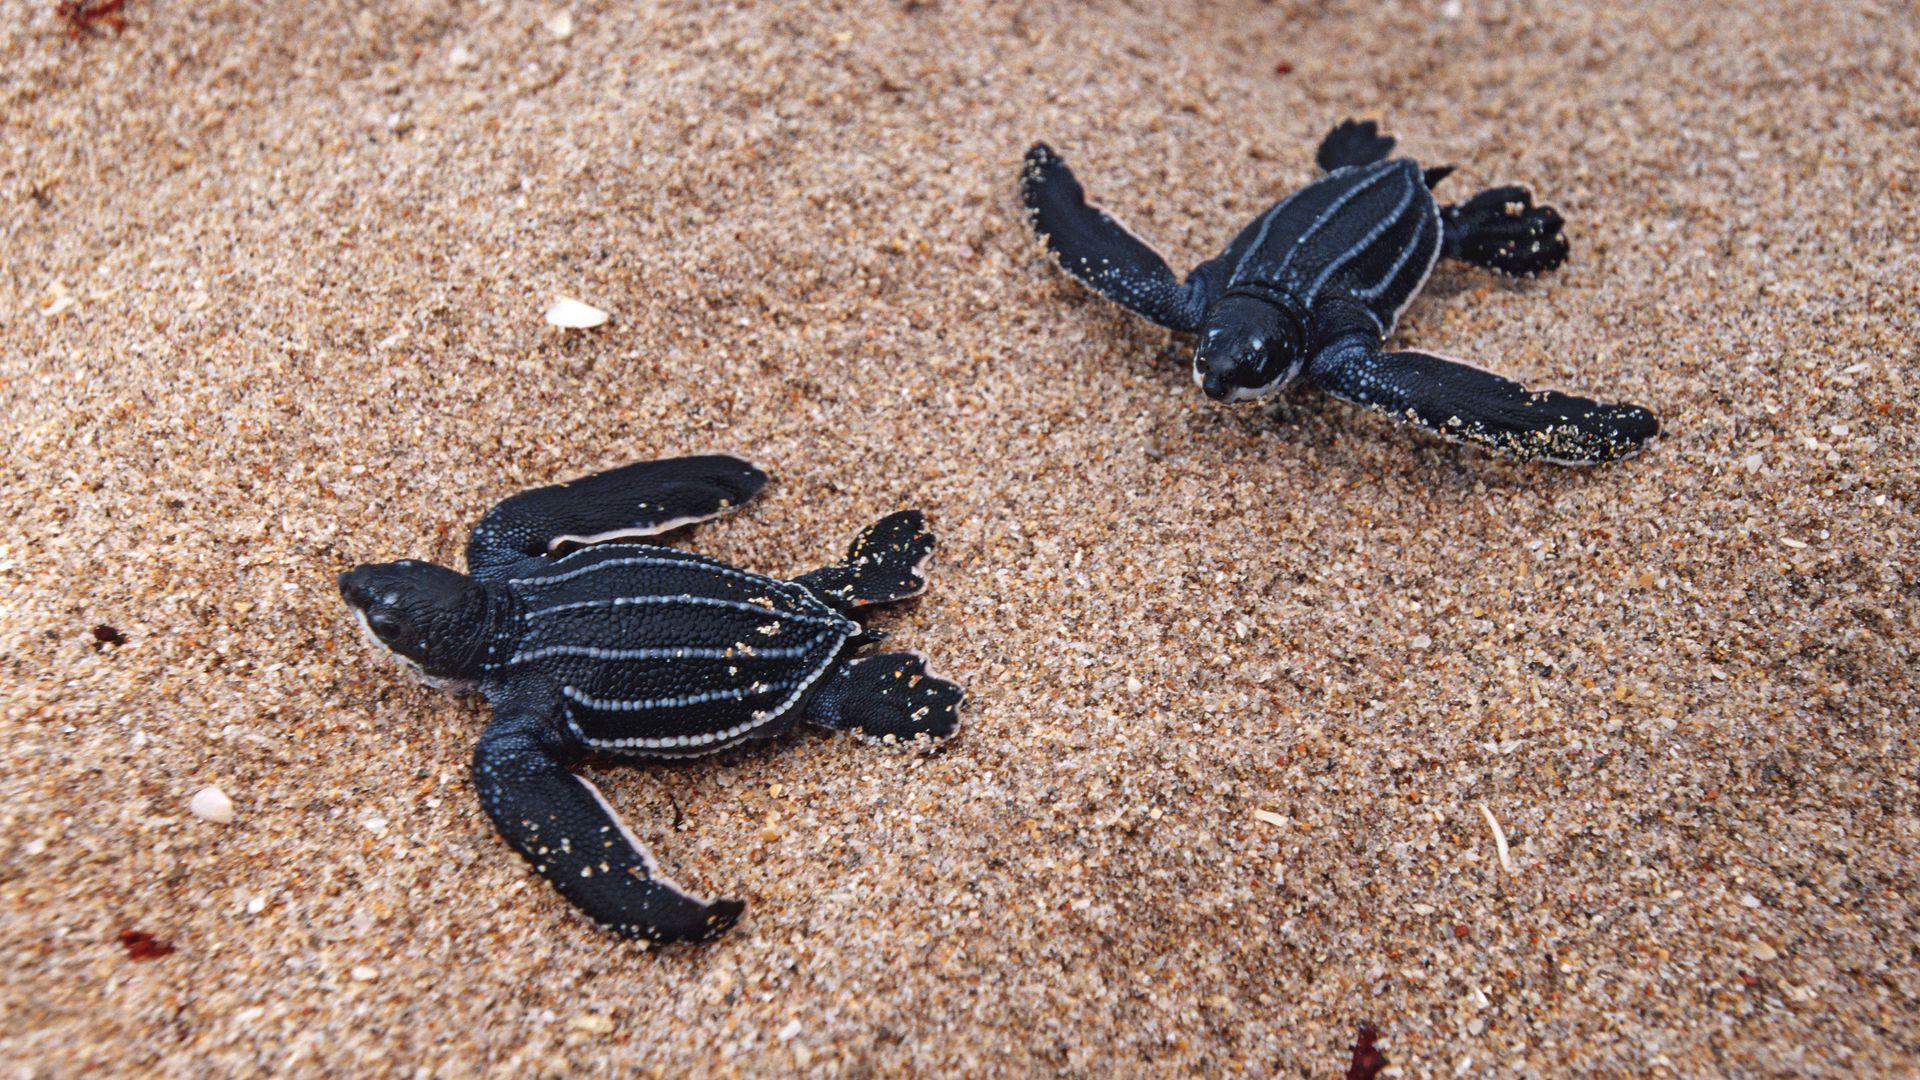 Two baby sea turtles in sand.